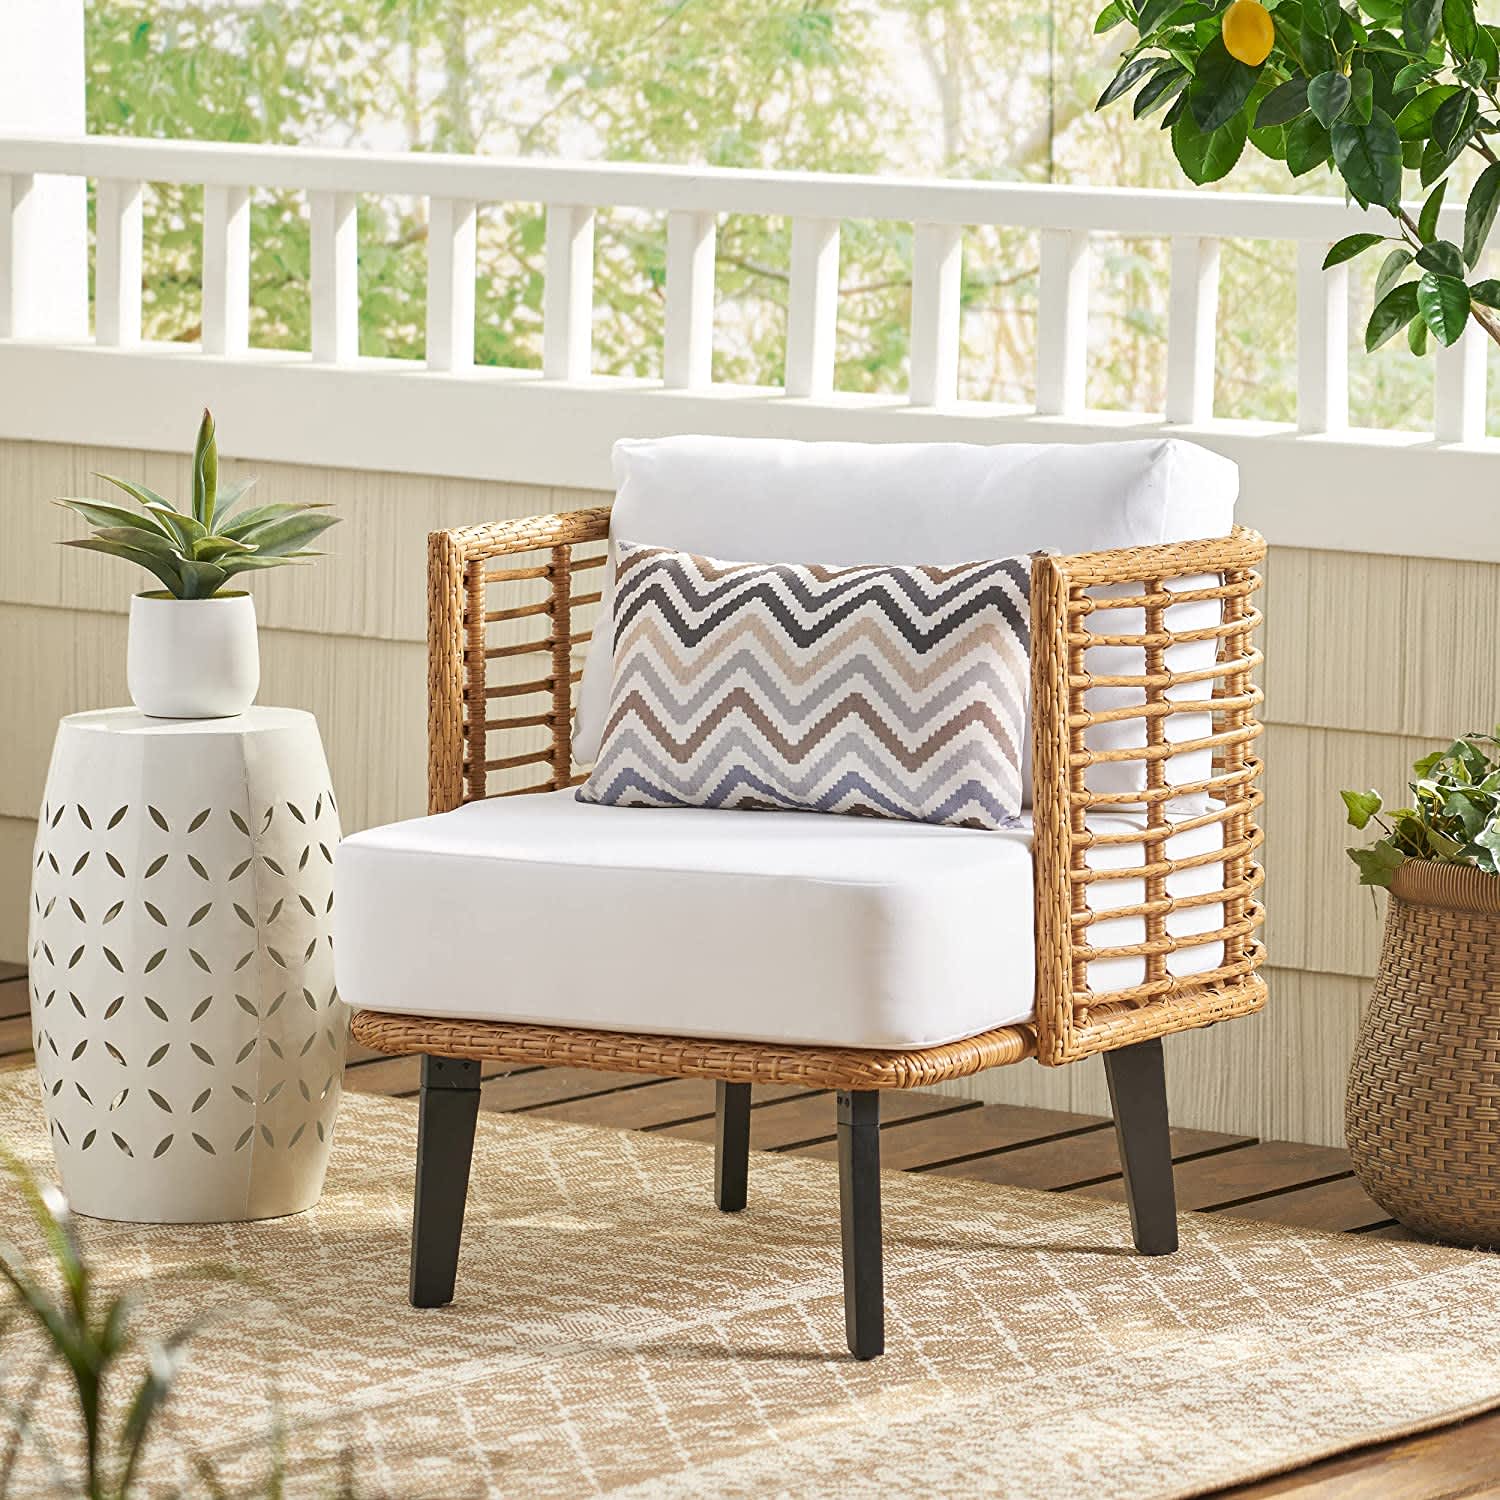 10 Sources for Good, Affordable Outdoor Furniture and Accessories